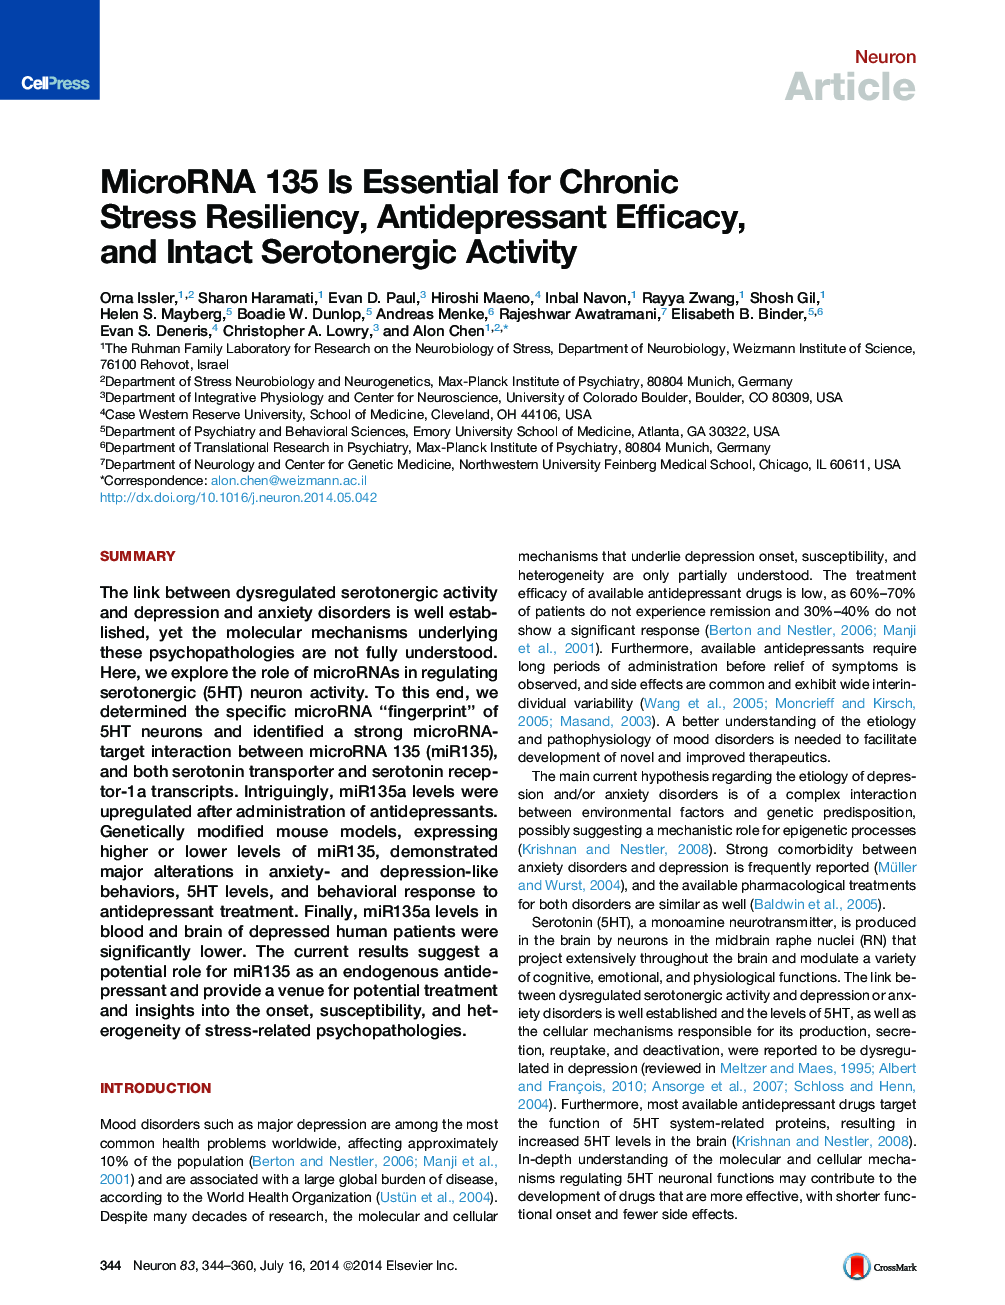 MicroRNA 135 Is Essential for Chronic Stress Resiliency, Antidepressant Efficacy, and Intact Serotonergic Activity